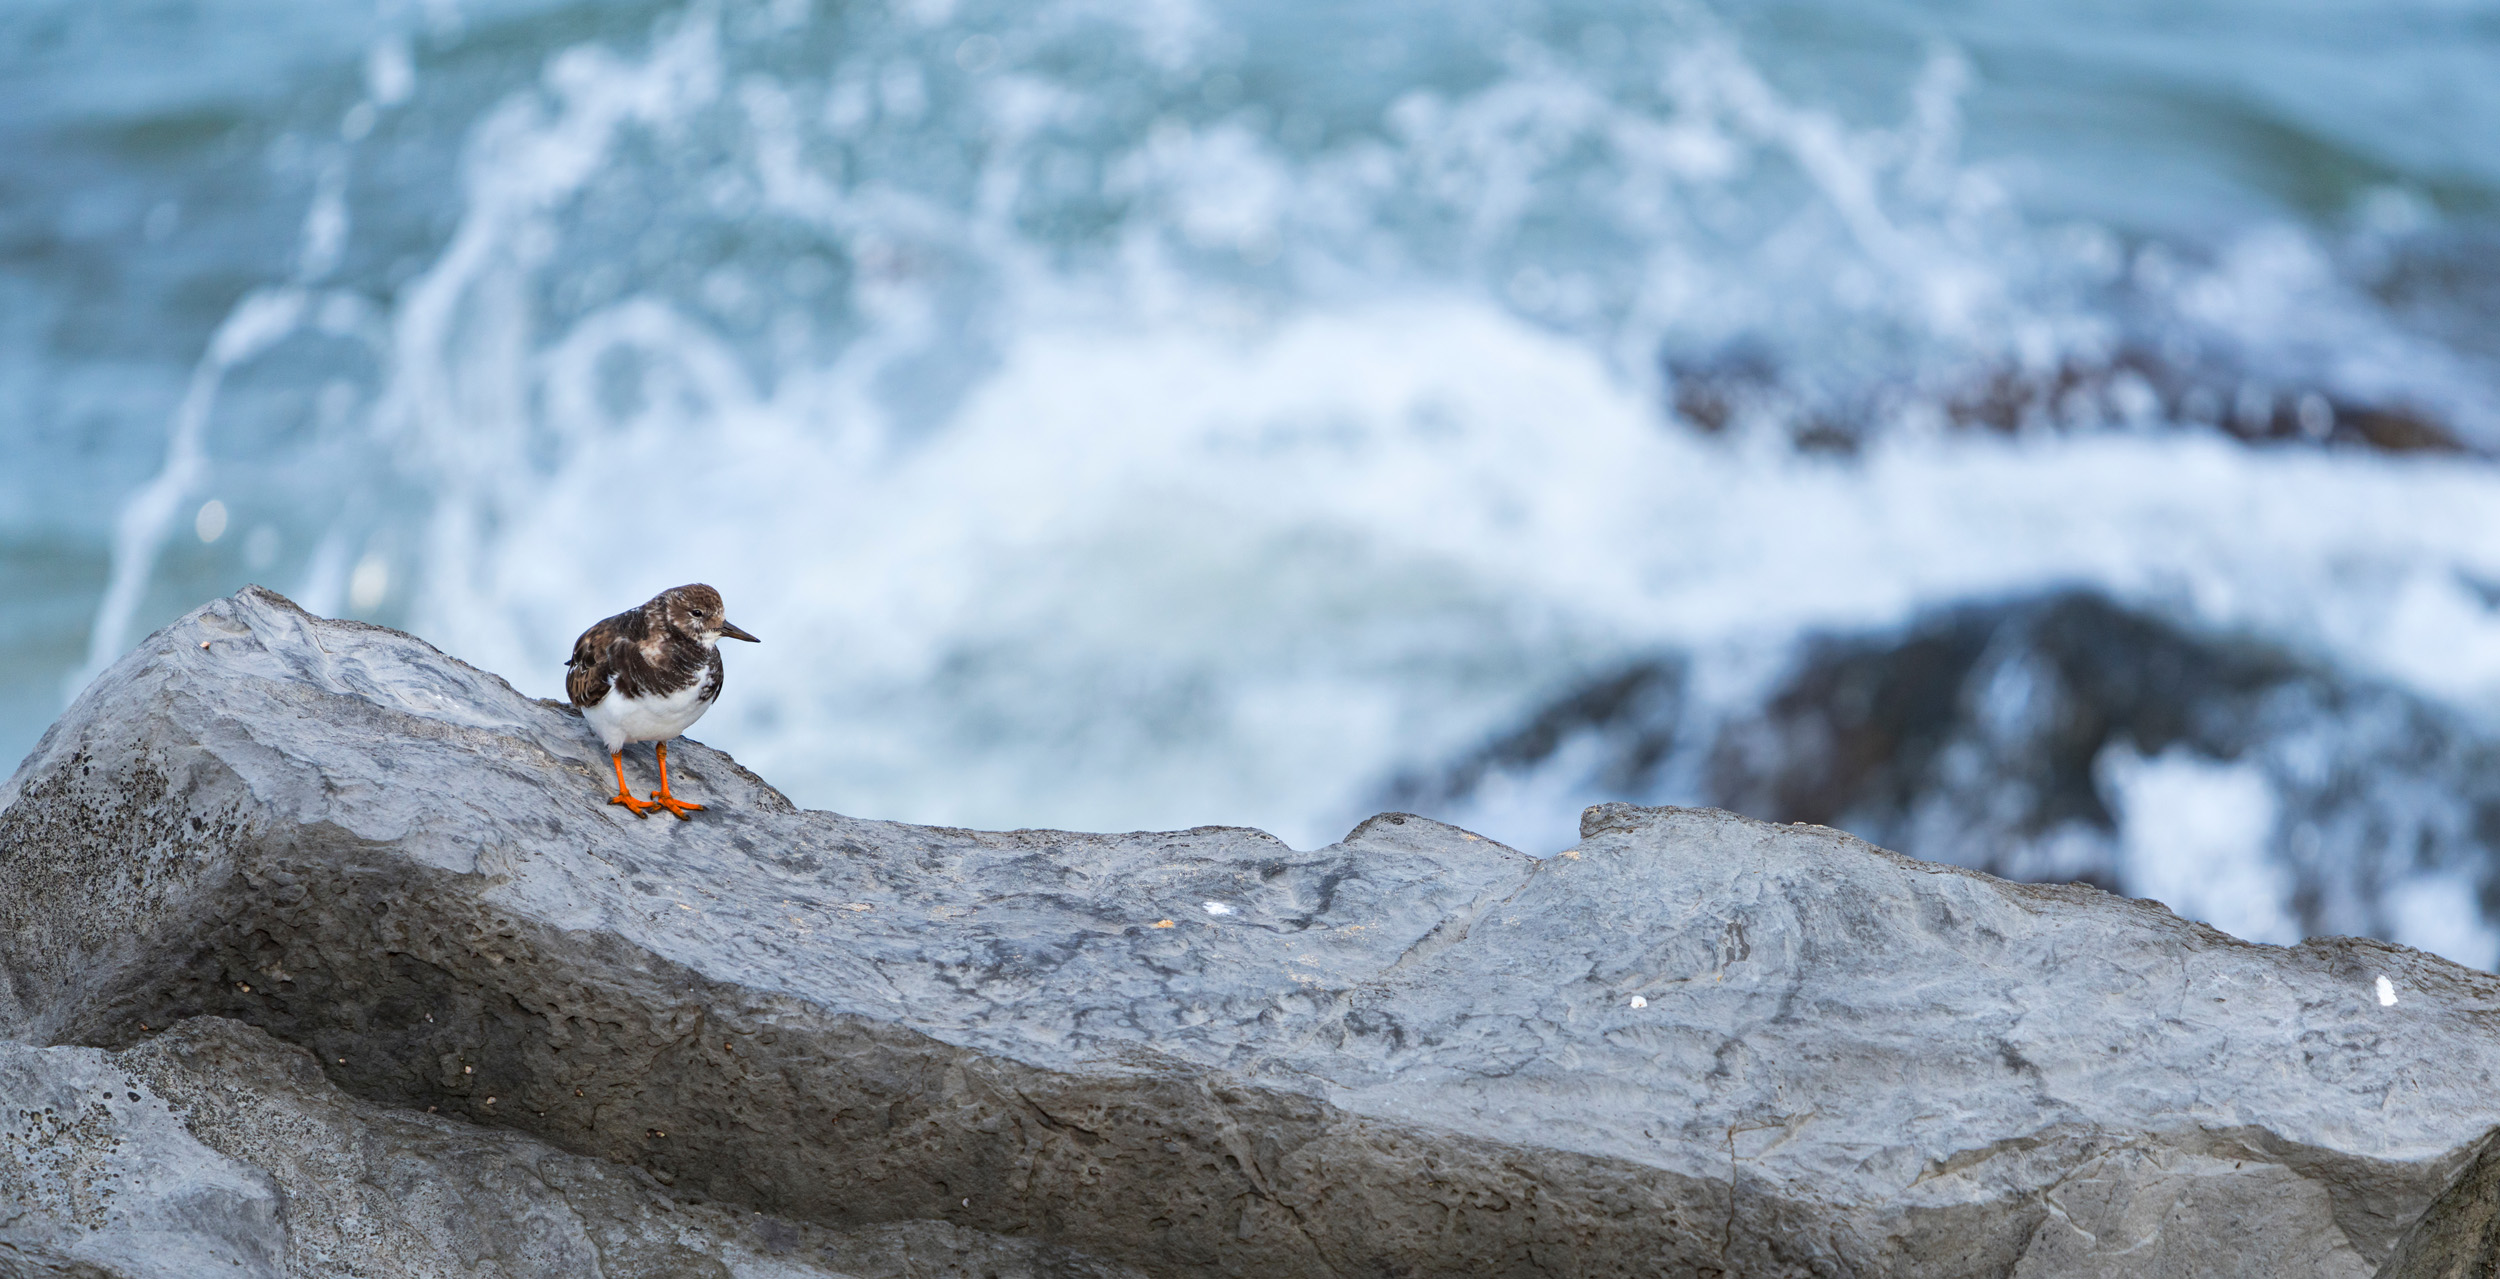 Lone Turnstone with summer plumage, stood on a rock with waves crashing below